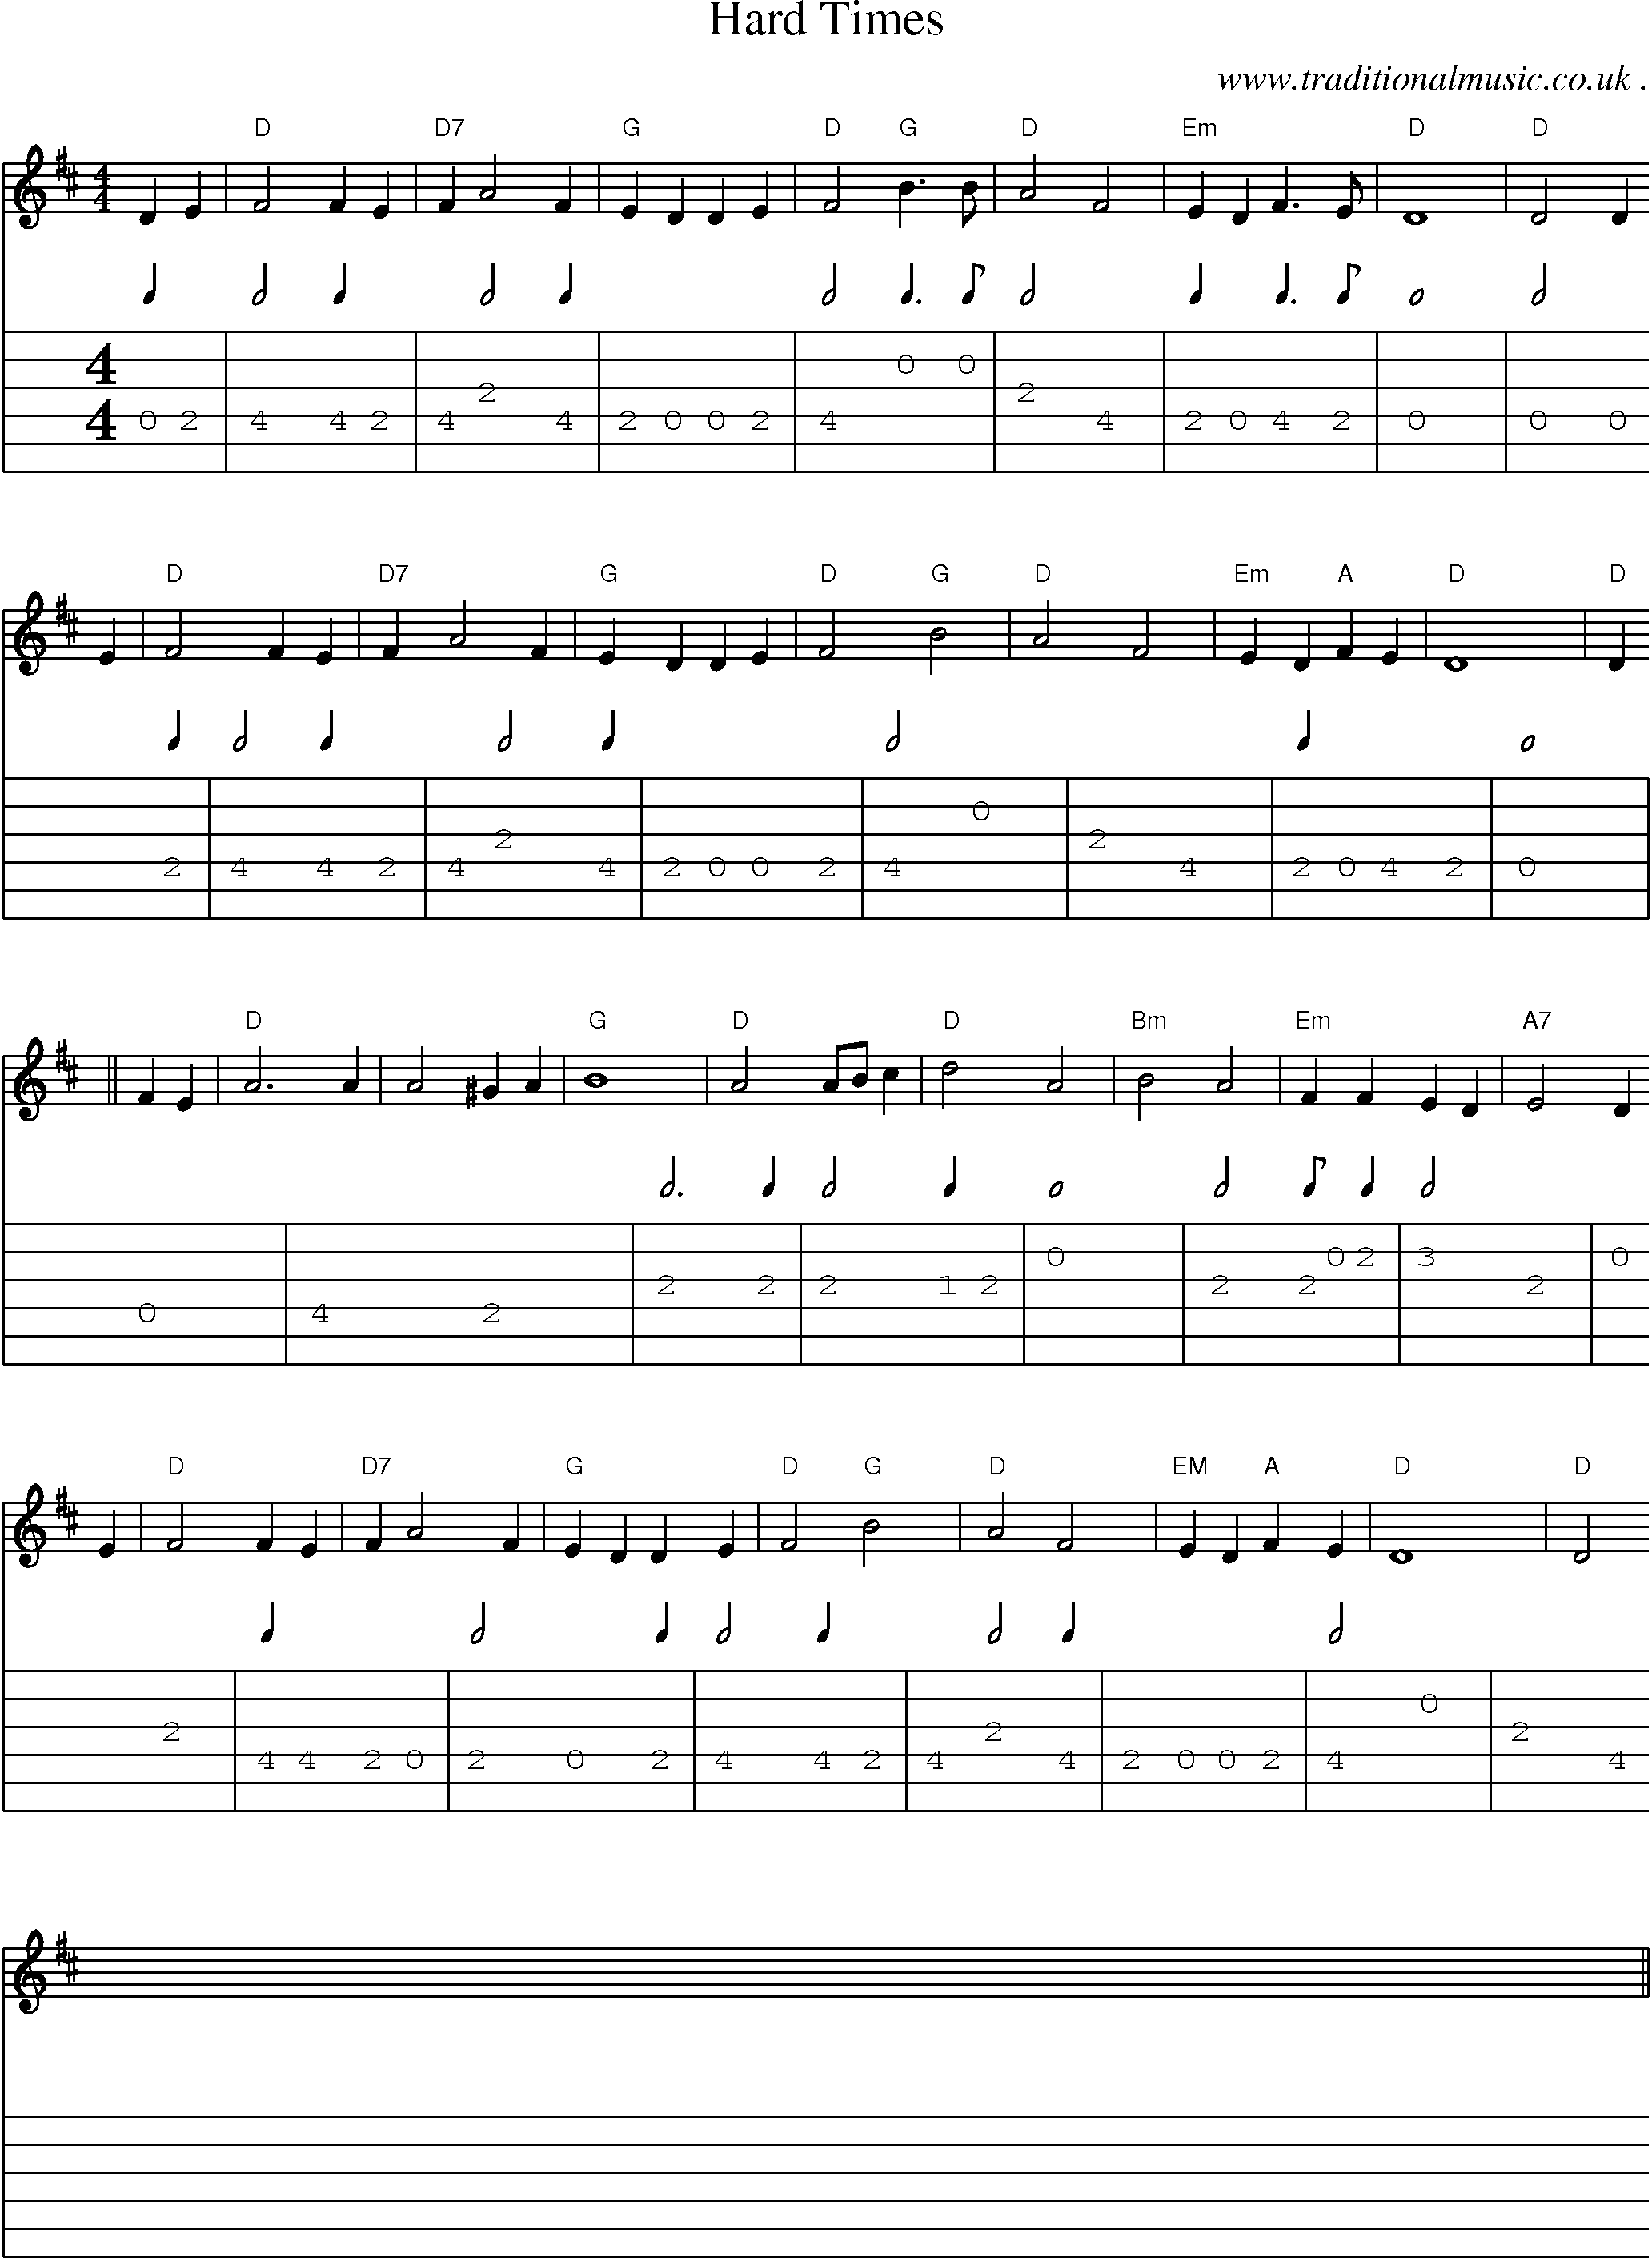 Music Score and Guitar Tabs for Hard Times